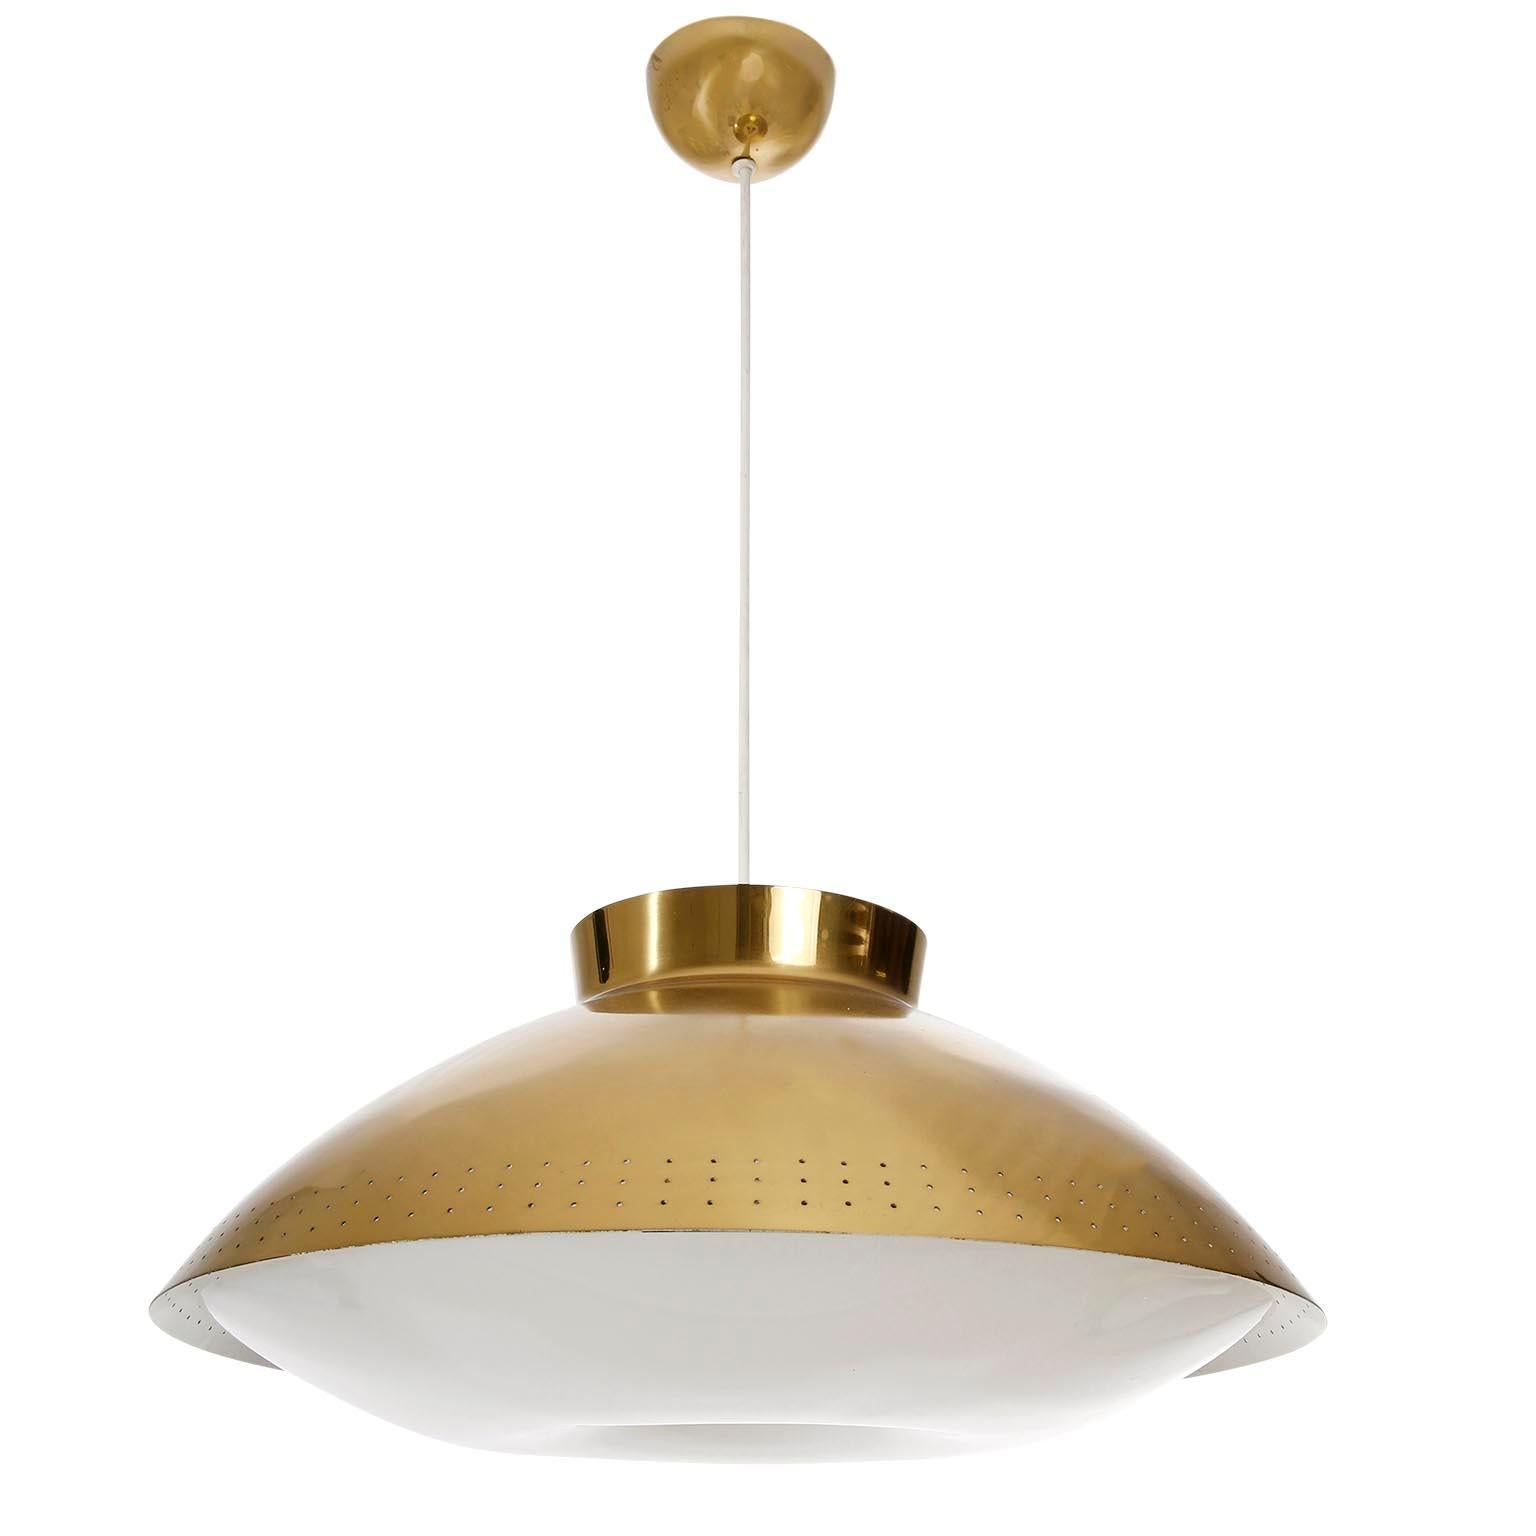 A Scandinavian Modern white plexiglass and brass pendant light designed by Lisa Johansson-Pape for Orno, manufactured in midcentury, circa 1950.
The fixture is made of a round and perforated brass lamp shade which is white painted on the inner